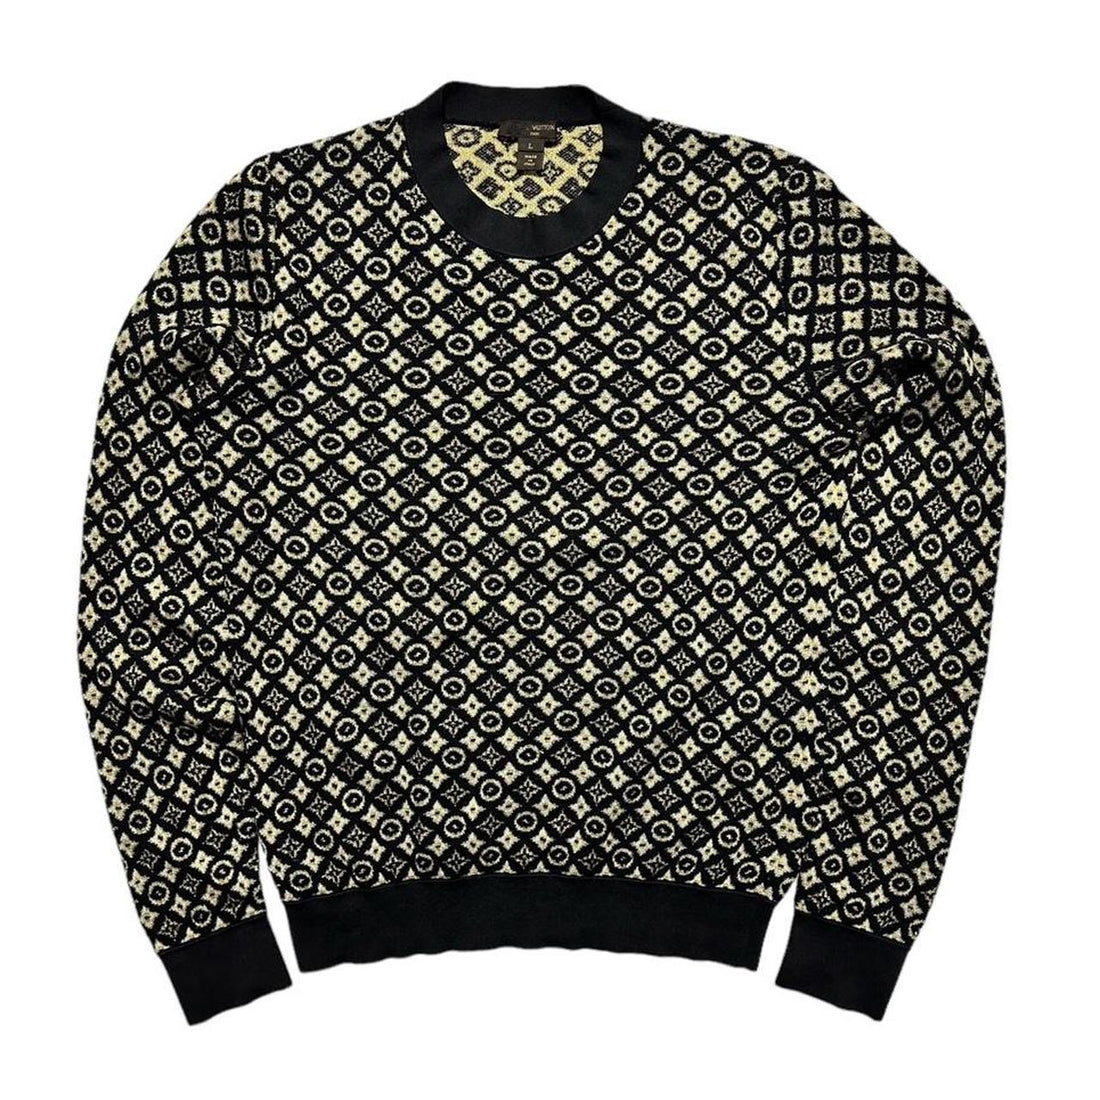 LV - Monogram Sweater. Size: Available by request ☑️ DM for more  information.